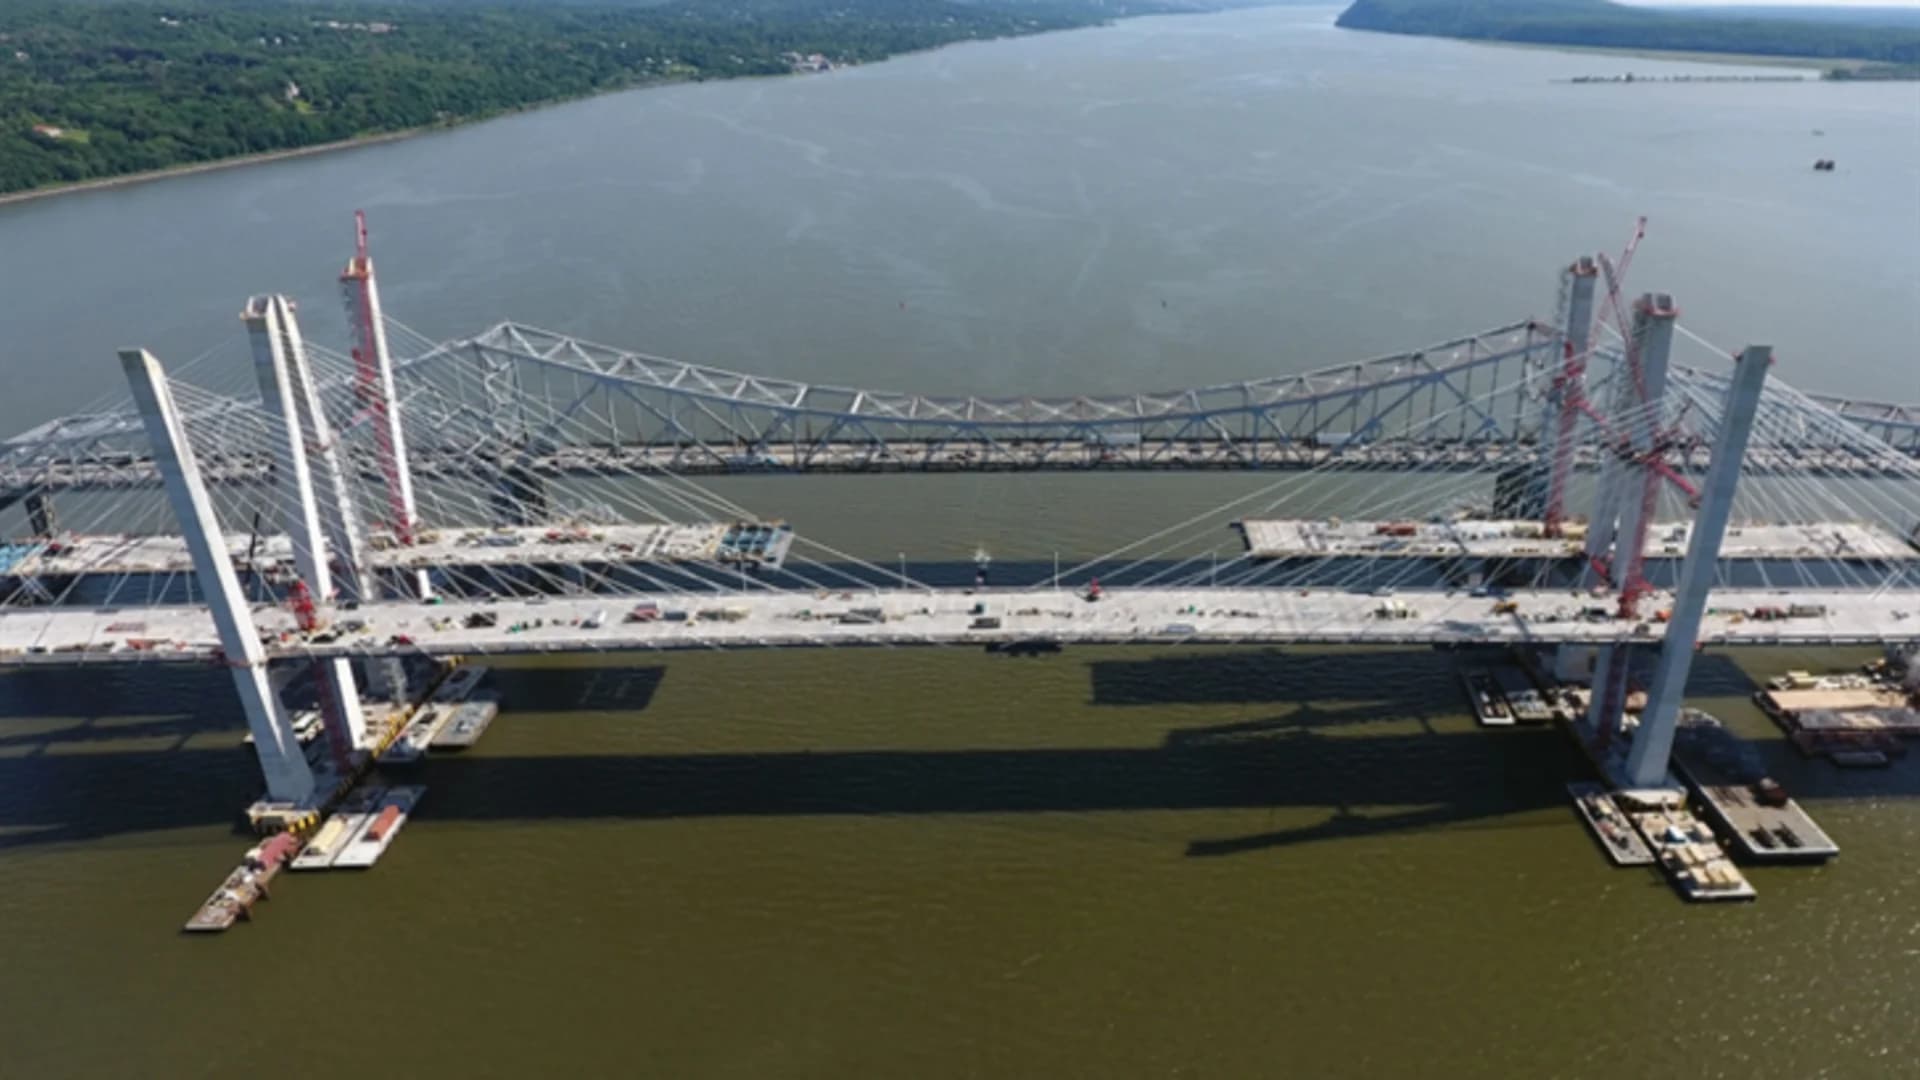 The Tappan Zee Bridge - Old and New